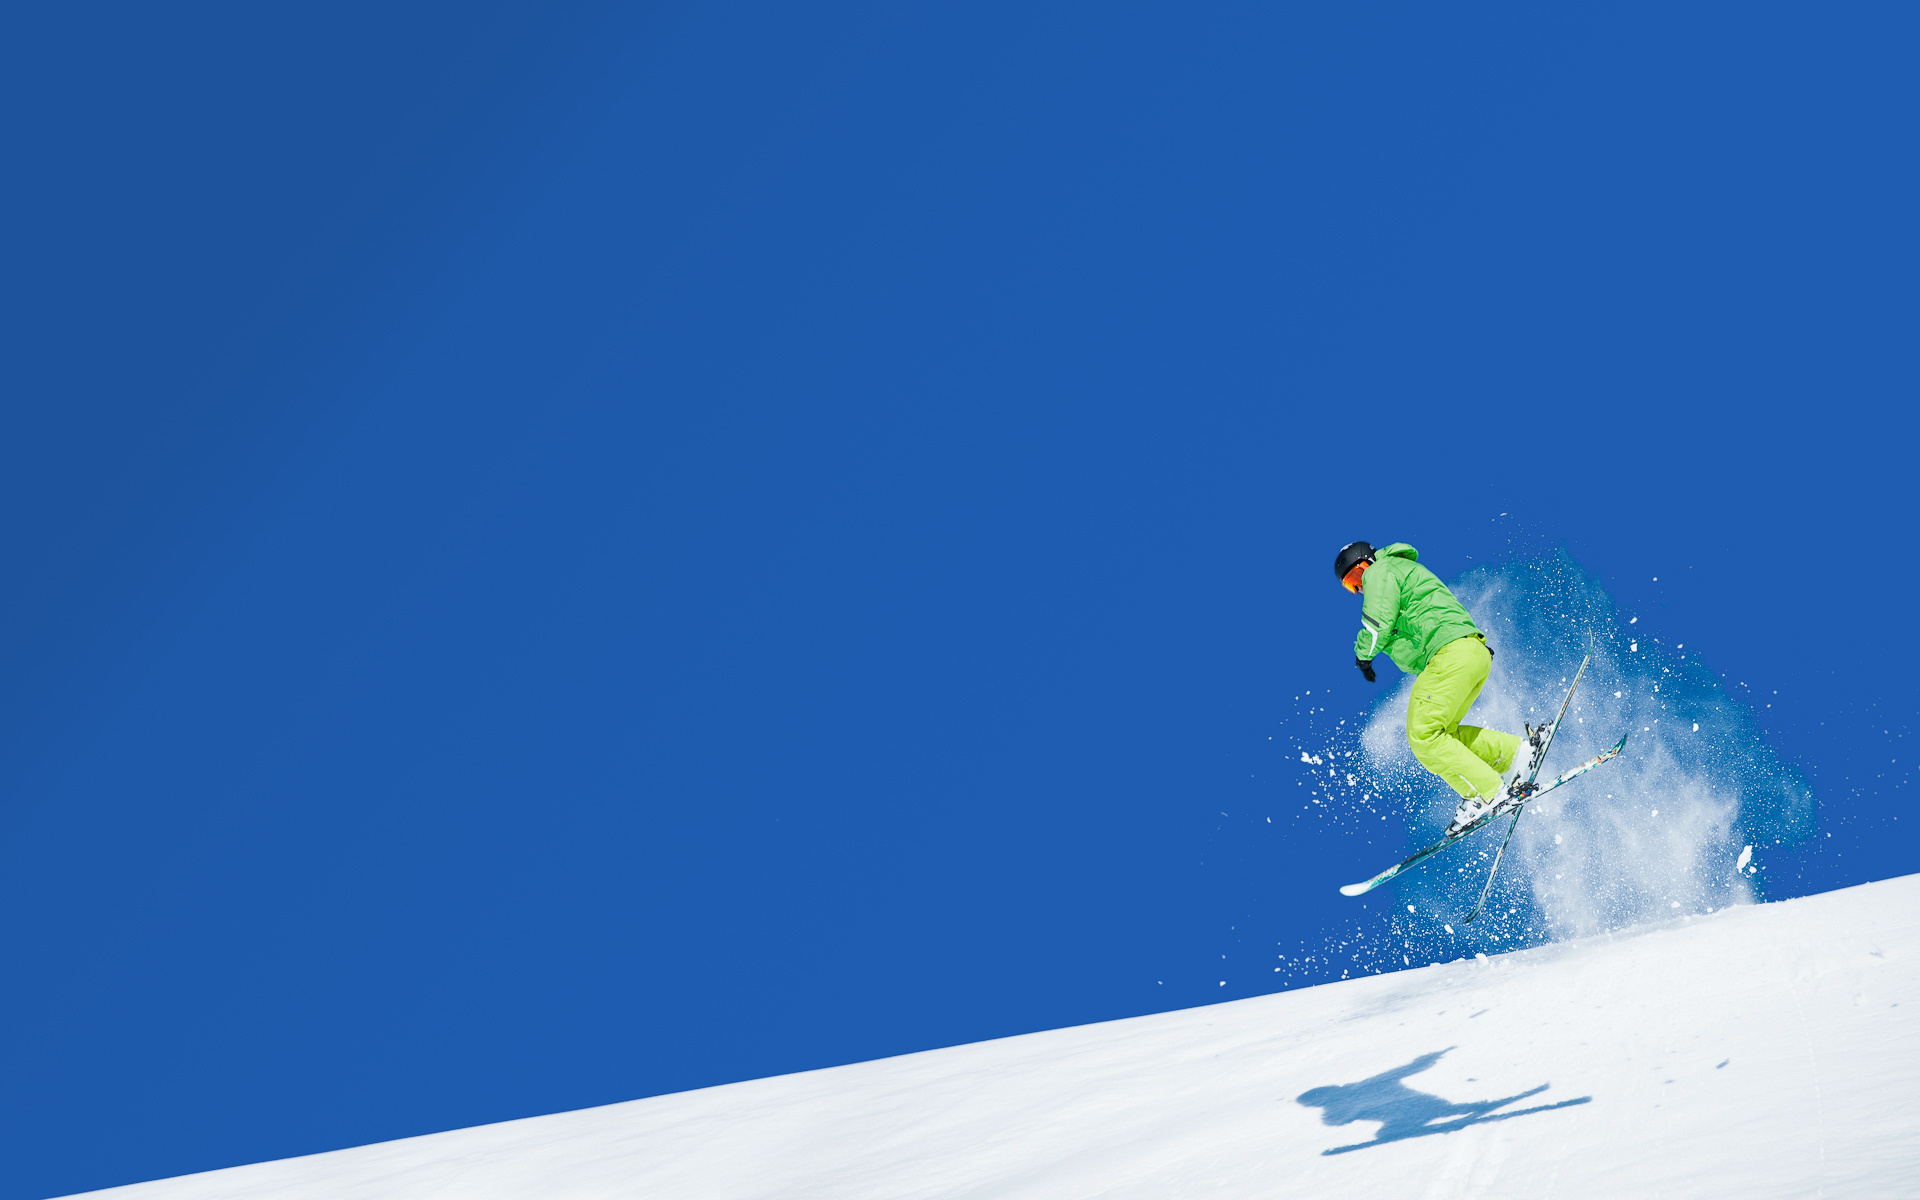 Alpine Skiing: Downhill, Cross-country skiing, Winter sports, Slalom, Freestyle sports on skis. 1920x1200 HD Wallpaper.